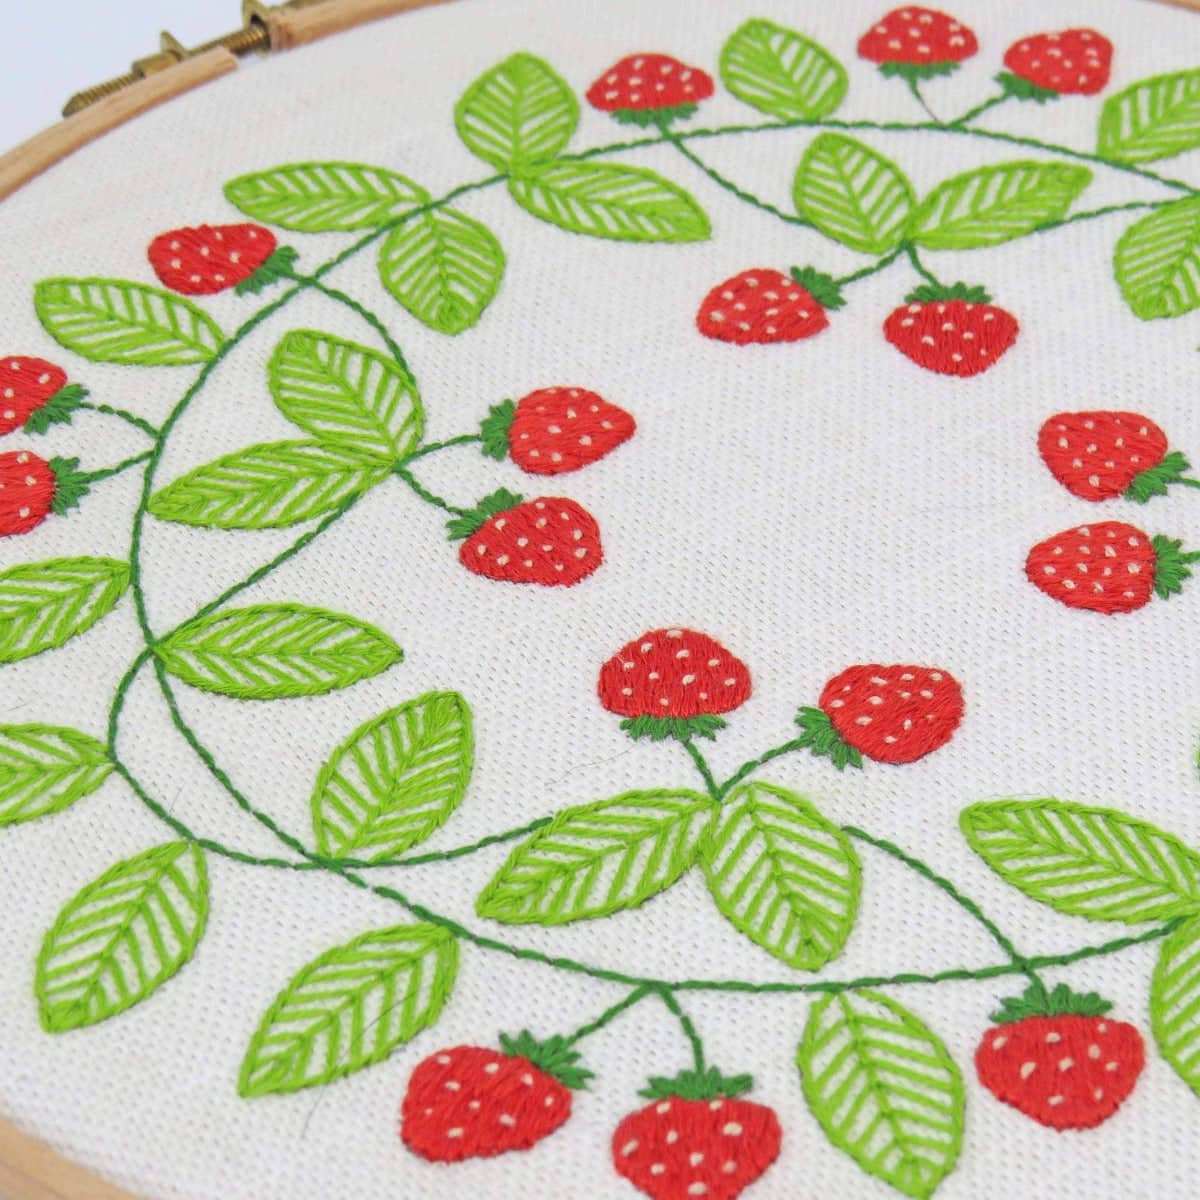 Embroidery Journal Pre Printed Embroidery Fabric